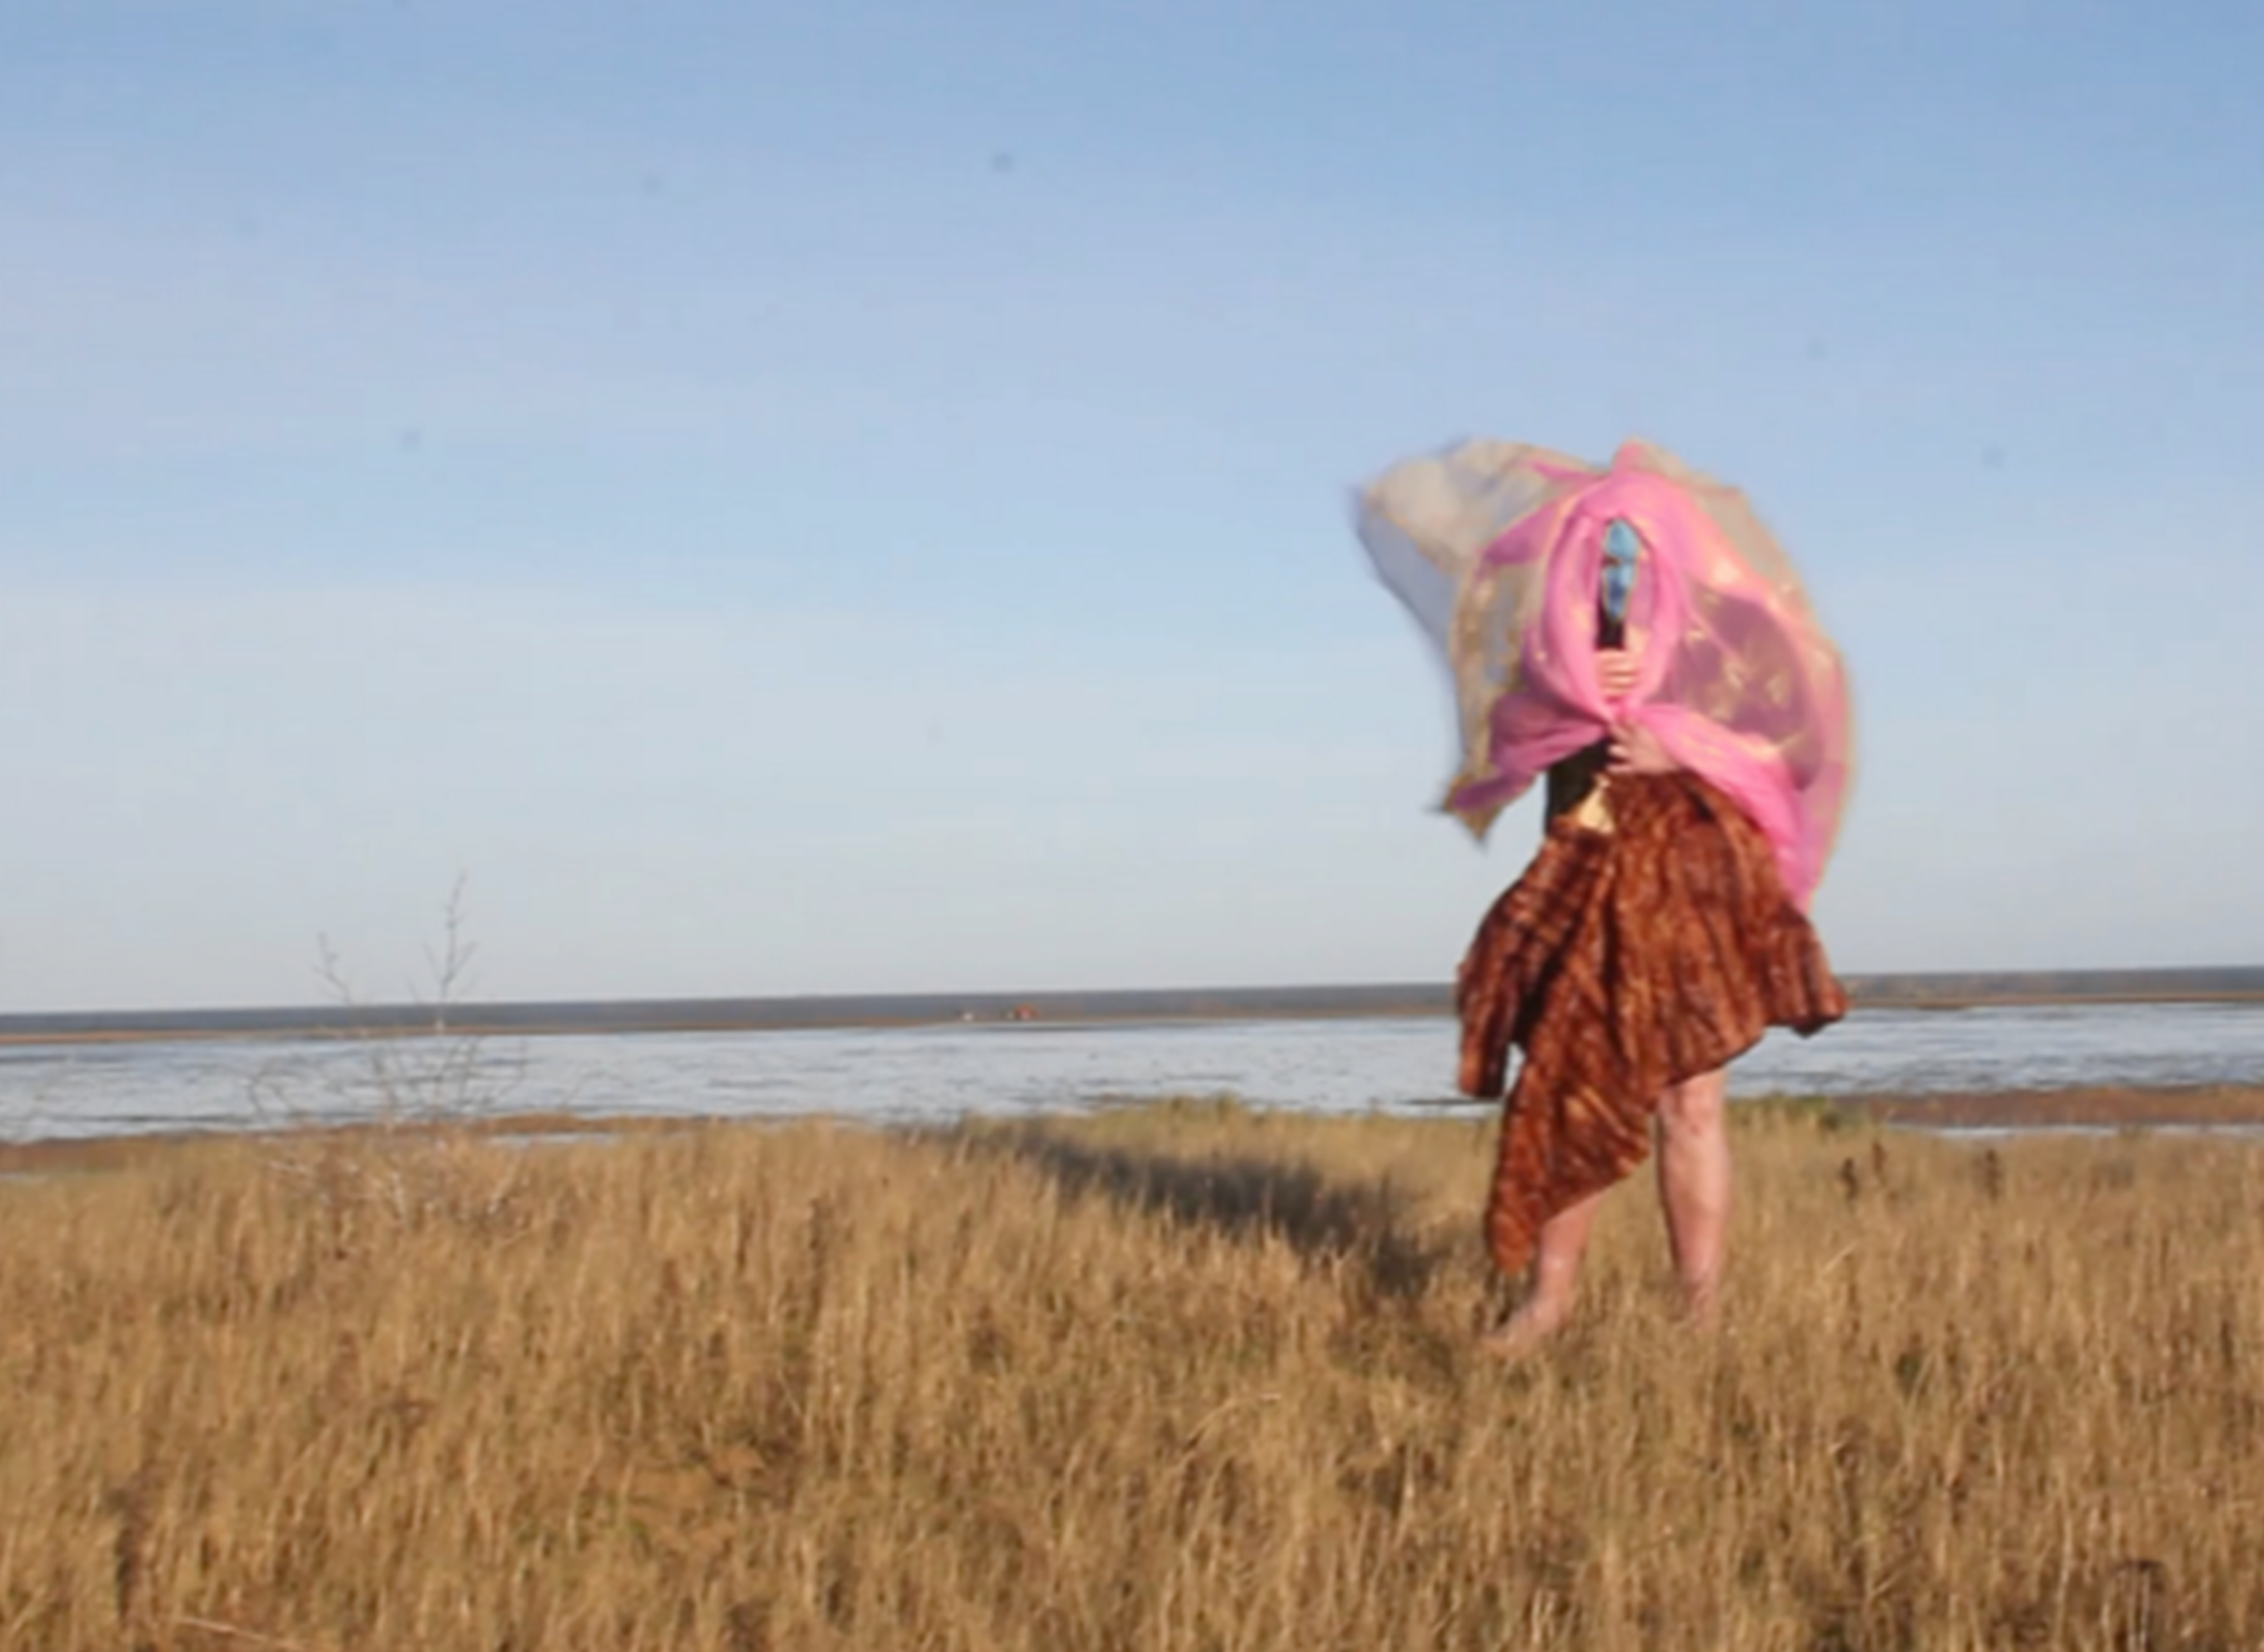 blurry human figure with unusual clothing stands windswept in marshland